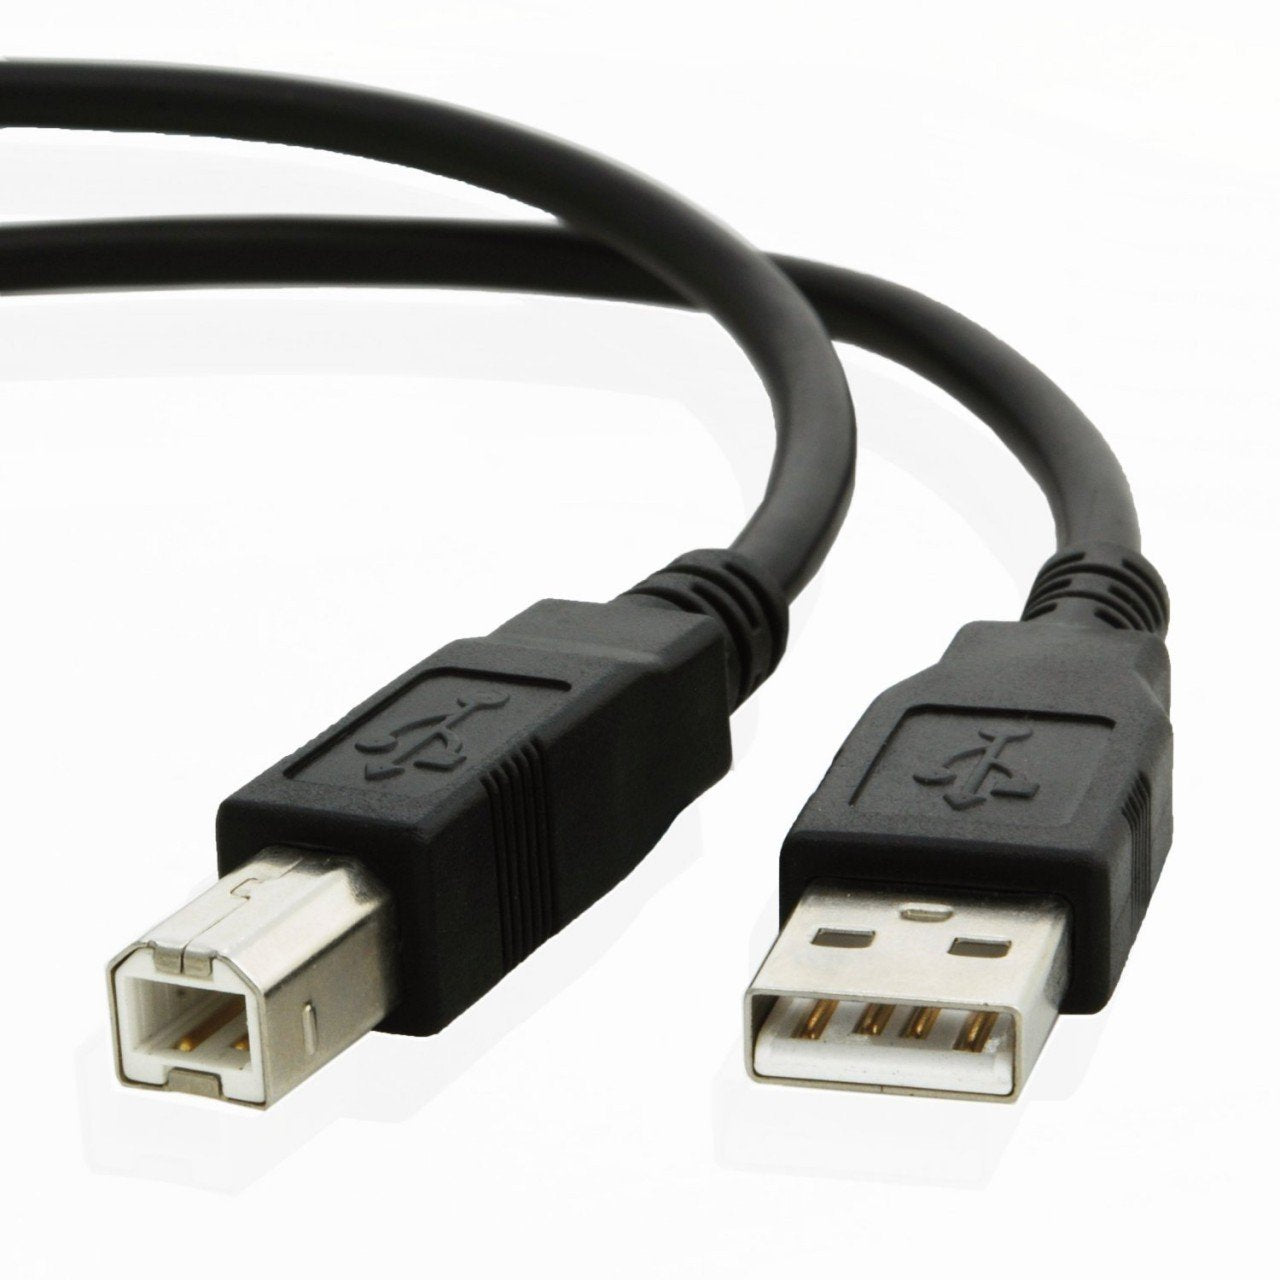 USB cable for Canon PIXMA MG7520